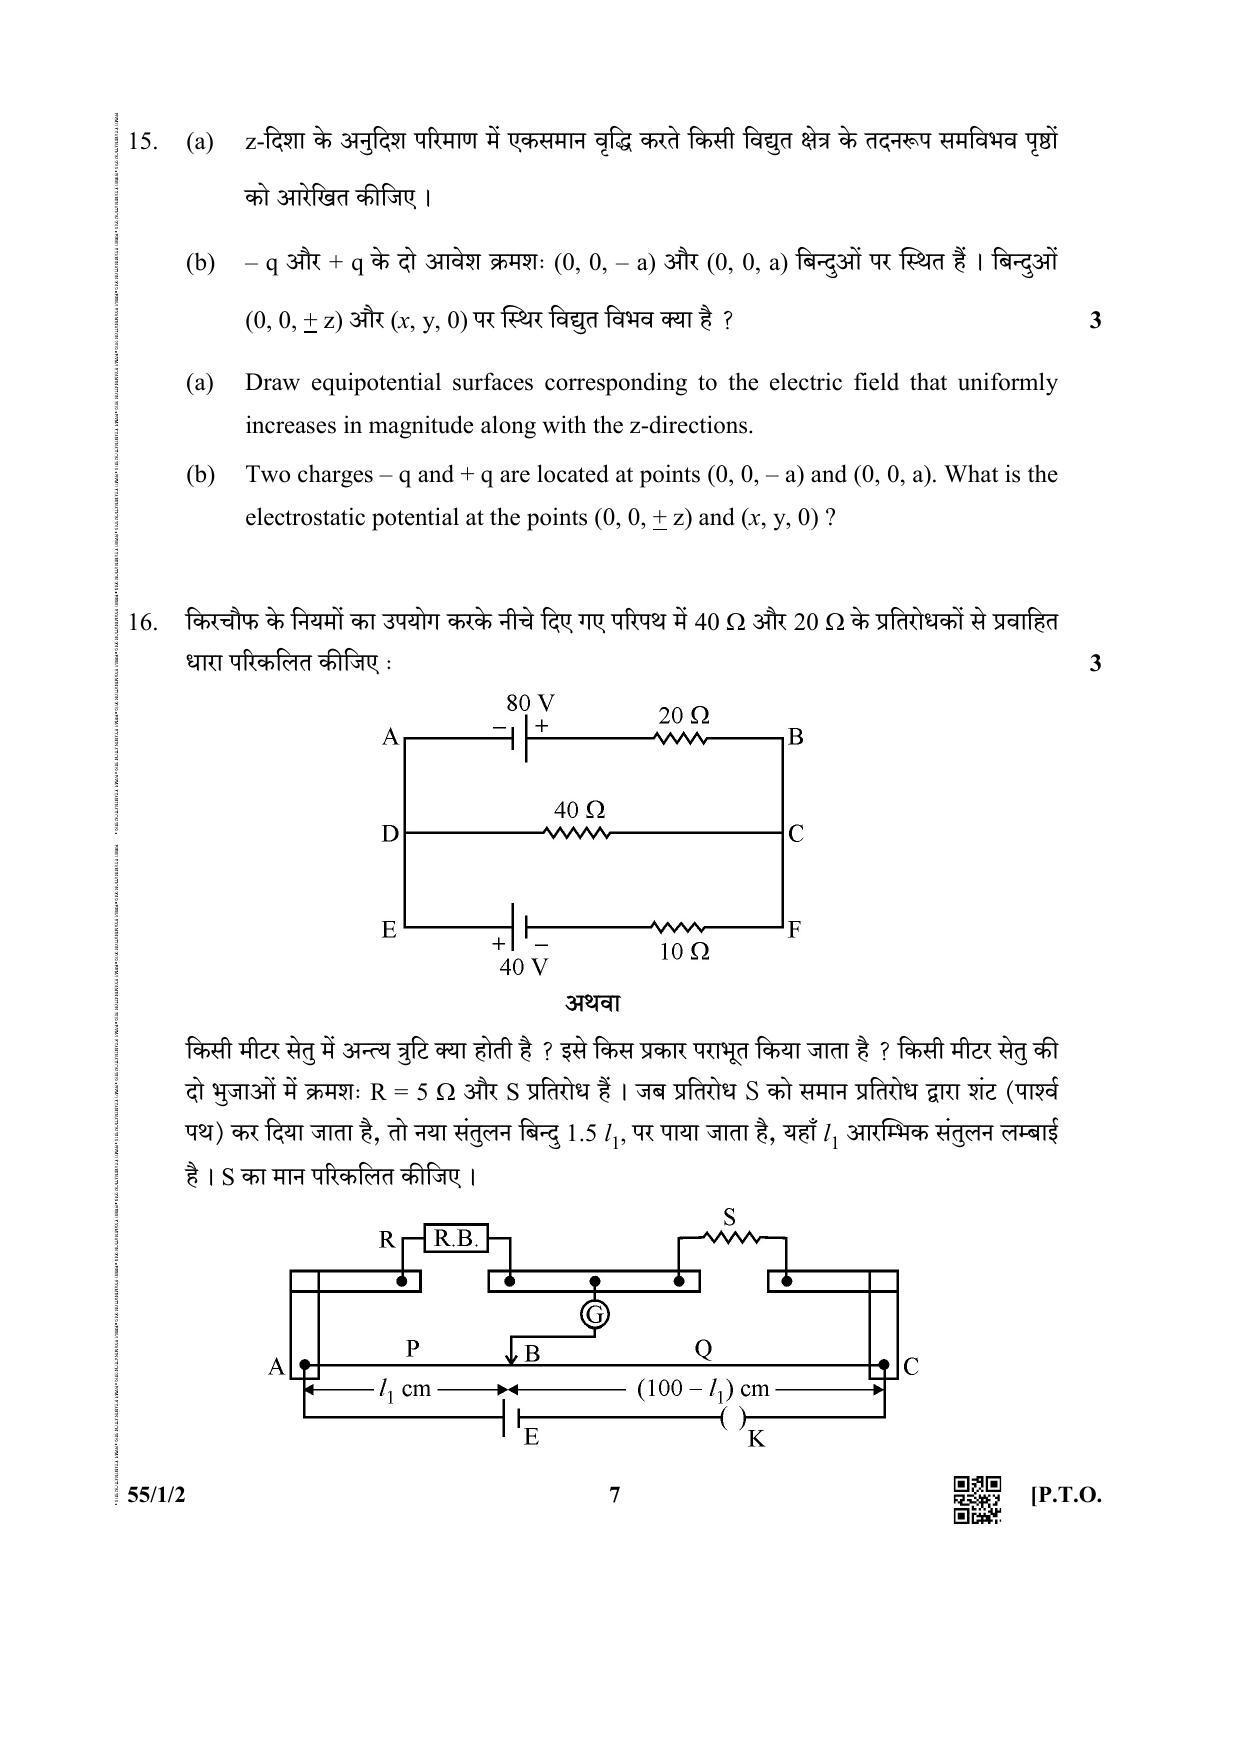 CBSE Class 12 55-1-2 (Physics) 2019 Question Paper - Page 7